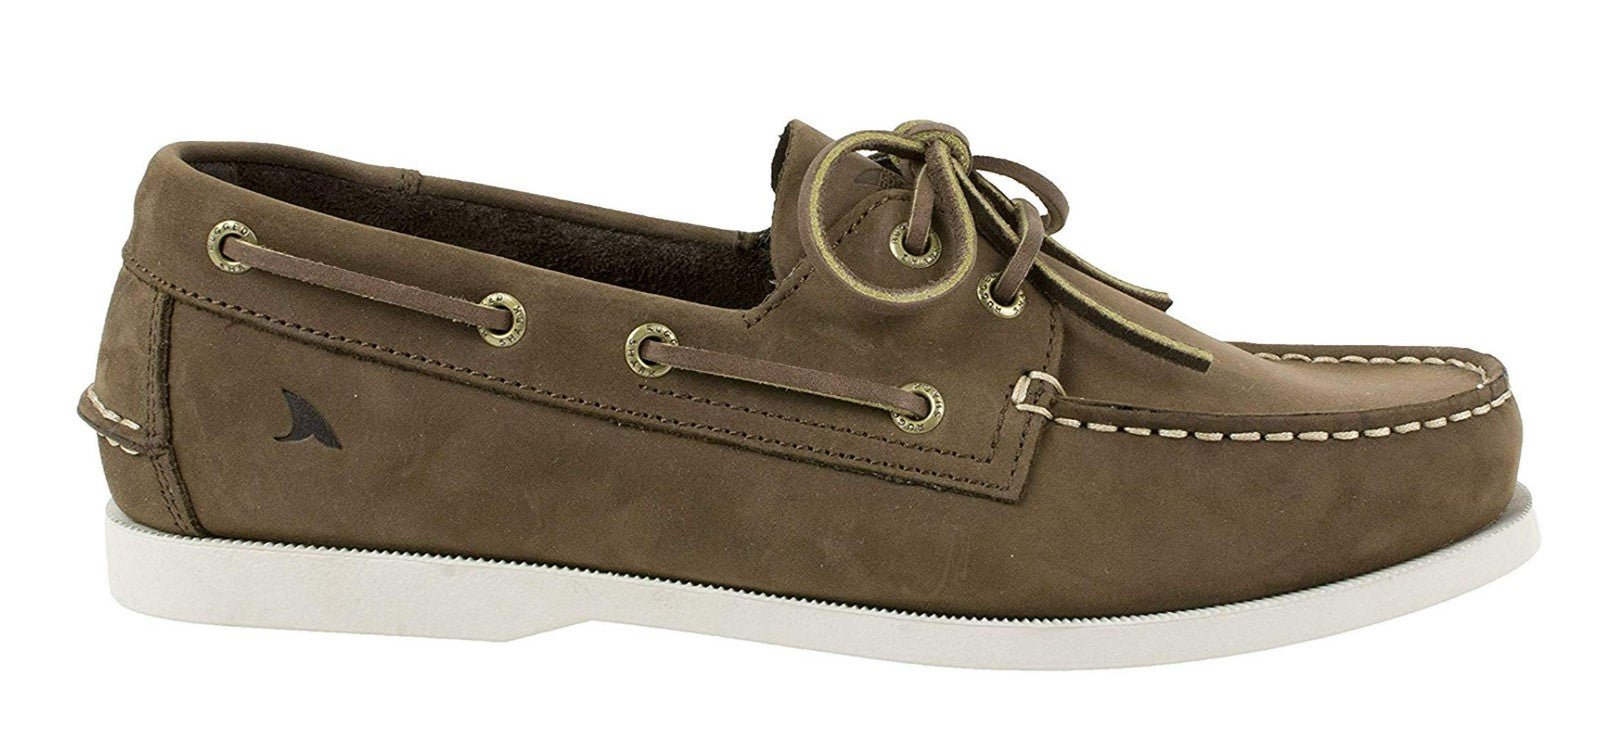 Rugged Shark Men S Boat Shoe Classic Look Premium Genuine Leather Select Pro